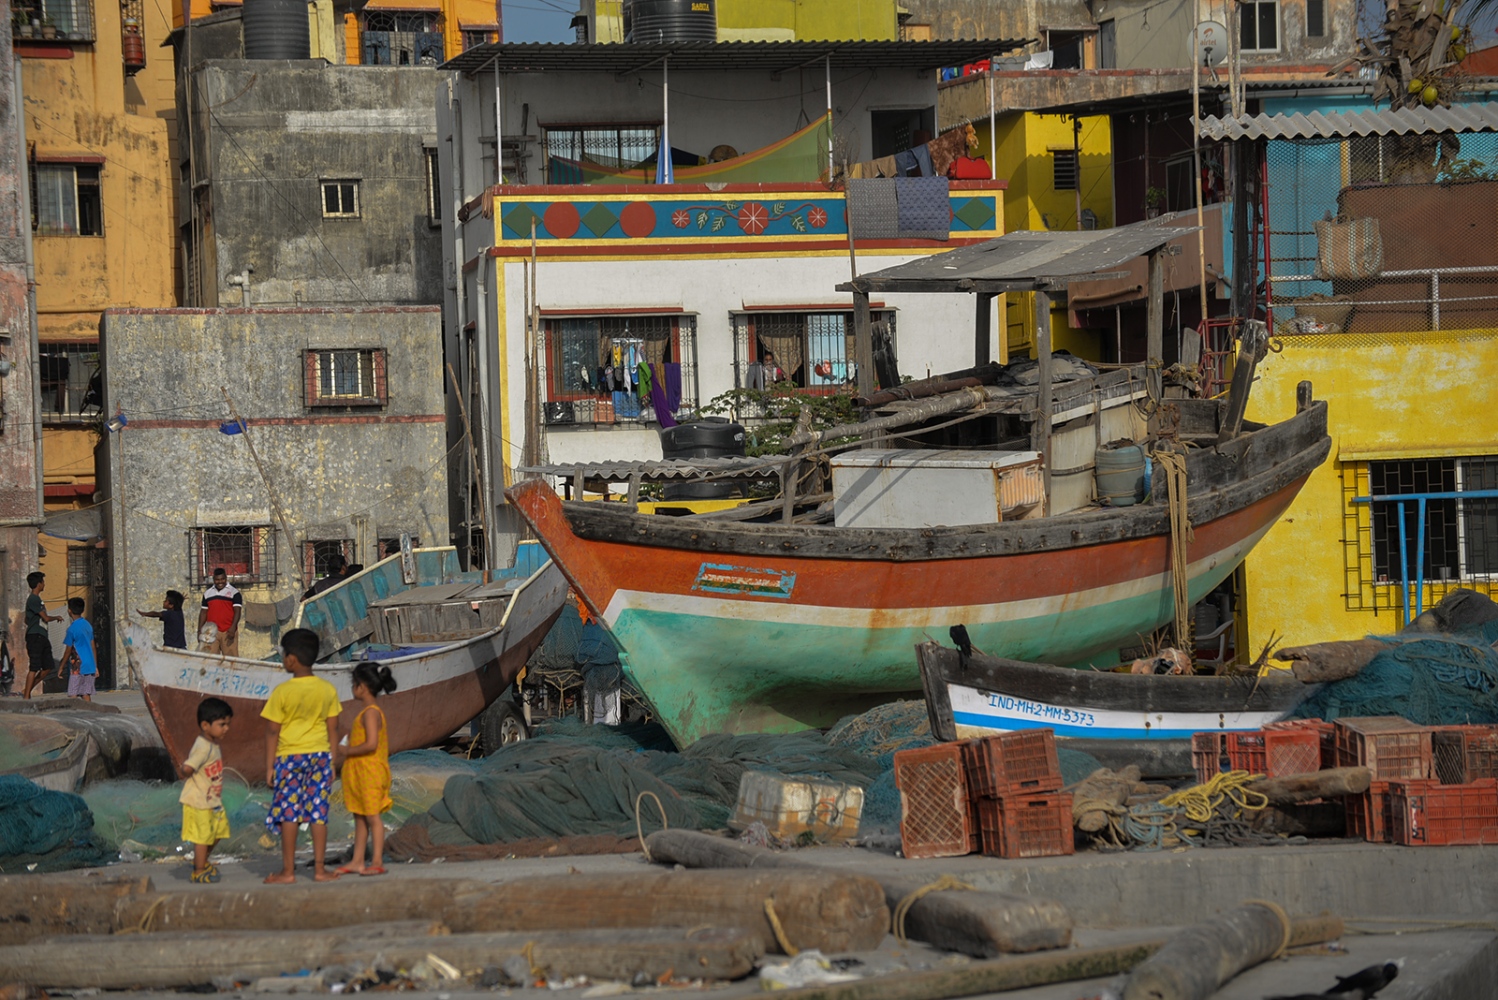 Development over community: perspective from a Mumbai fishing village  - ...